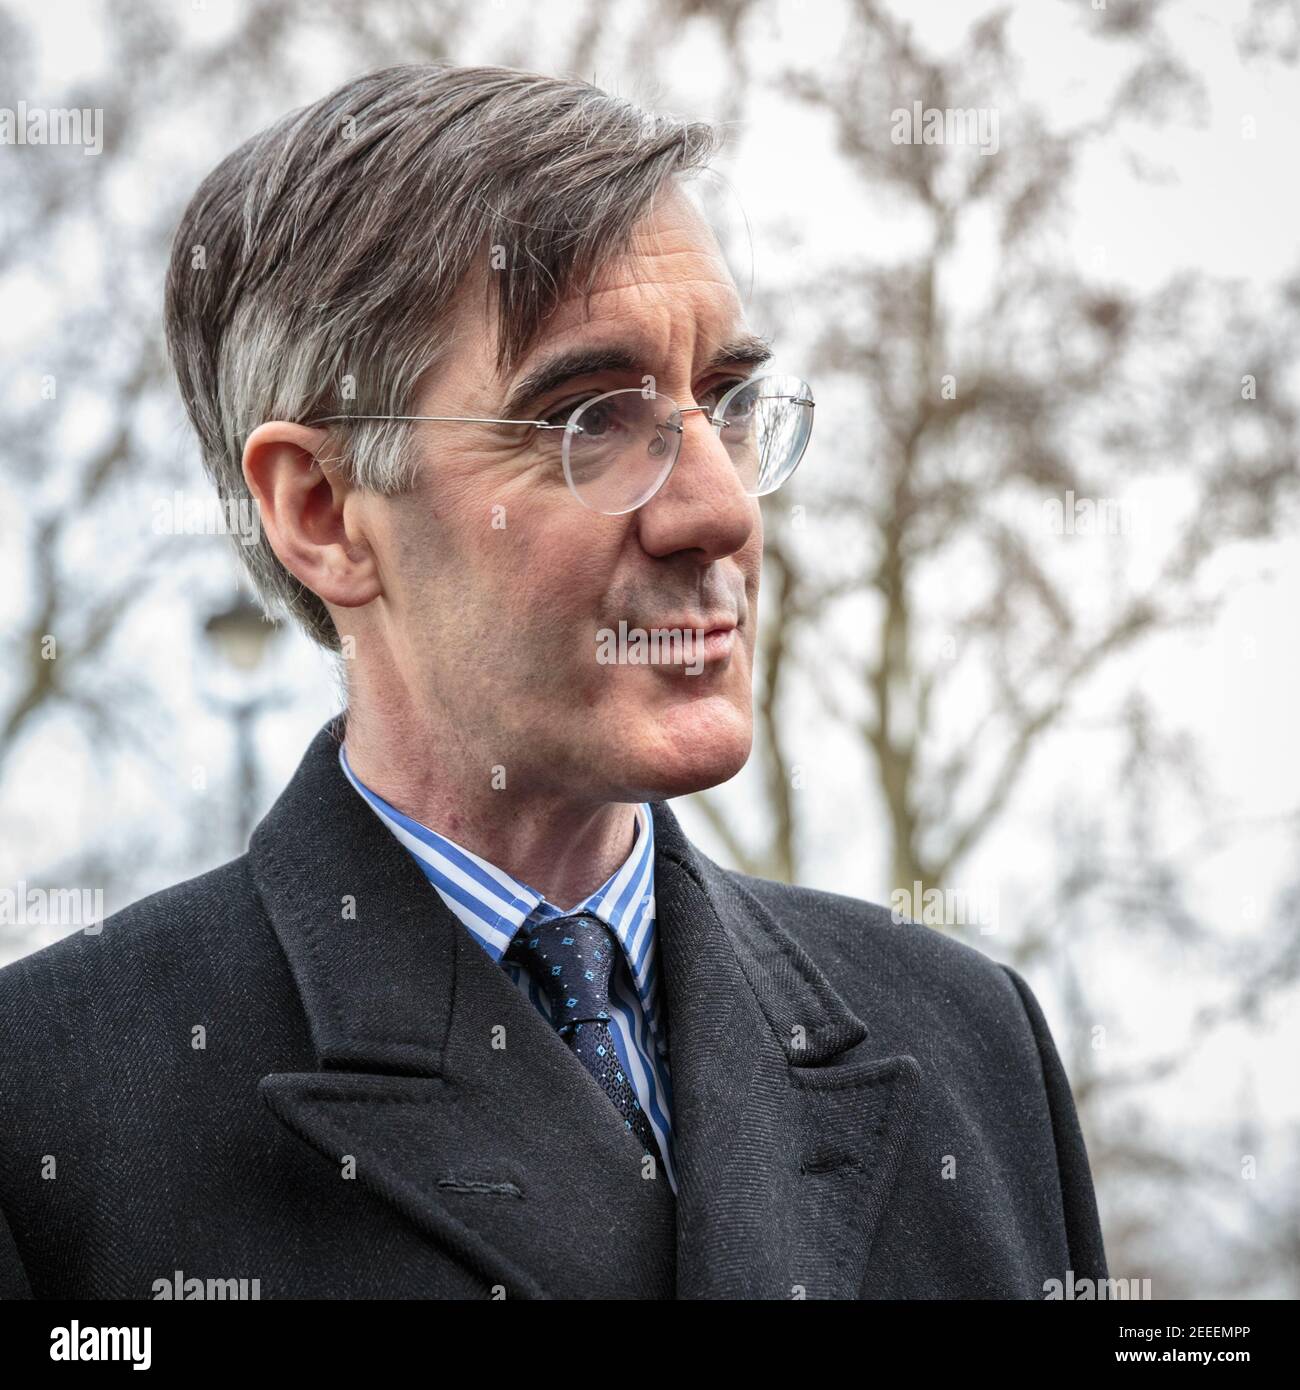 Jacob Rees-Mogg, MP, Conservative Party, British Politician, Member of Parliament North East Somerset, interviewed Stock Photo